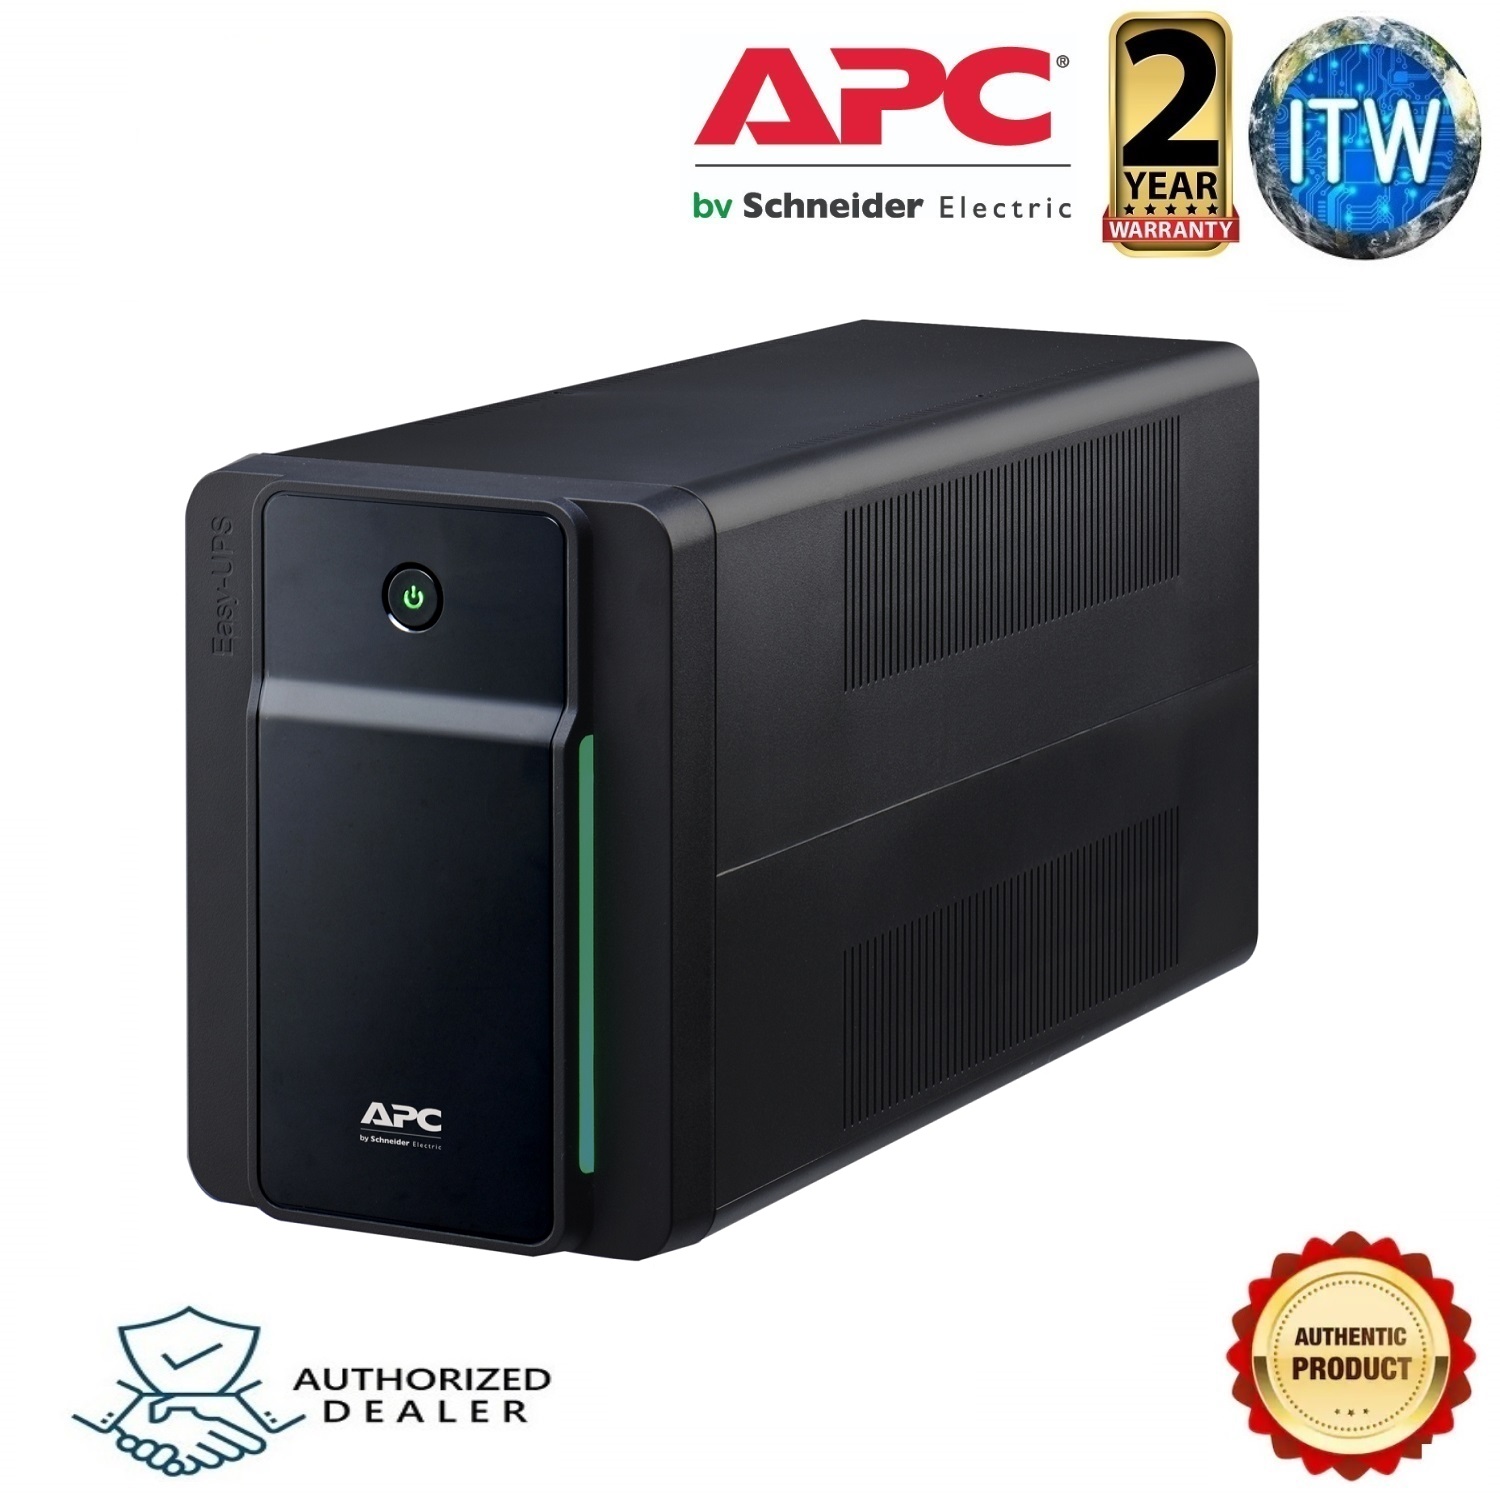 Thinking Tools, Inc - Official Online Store, APC BVX650I-PH EASY UPS 650VA  230V WITH AVR, thinkingtools@mall, Shop Now & Save More!